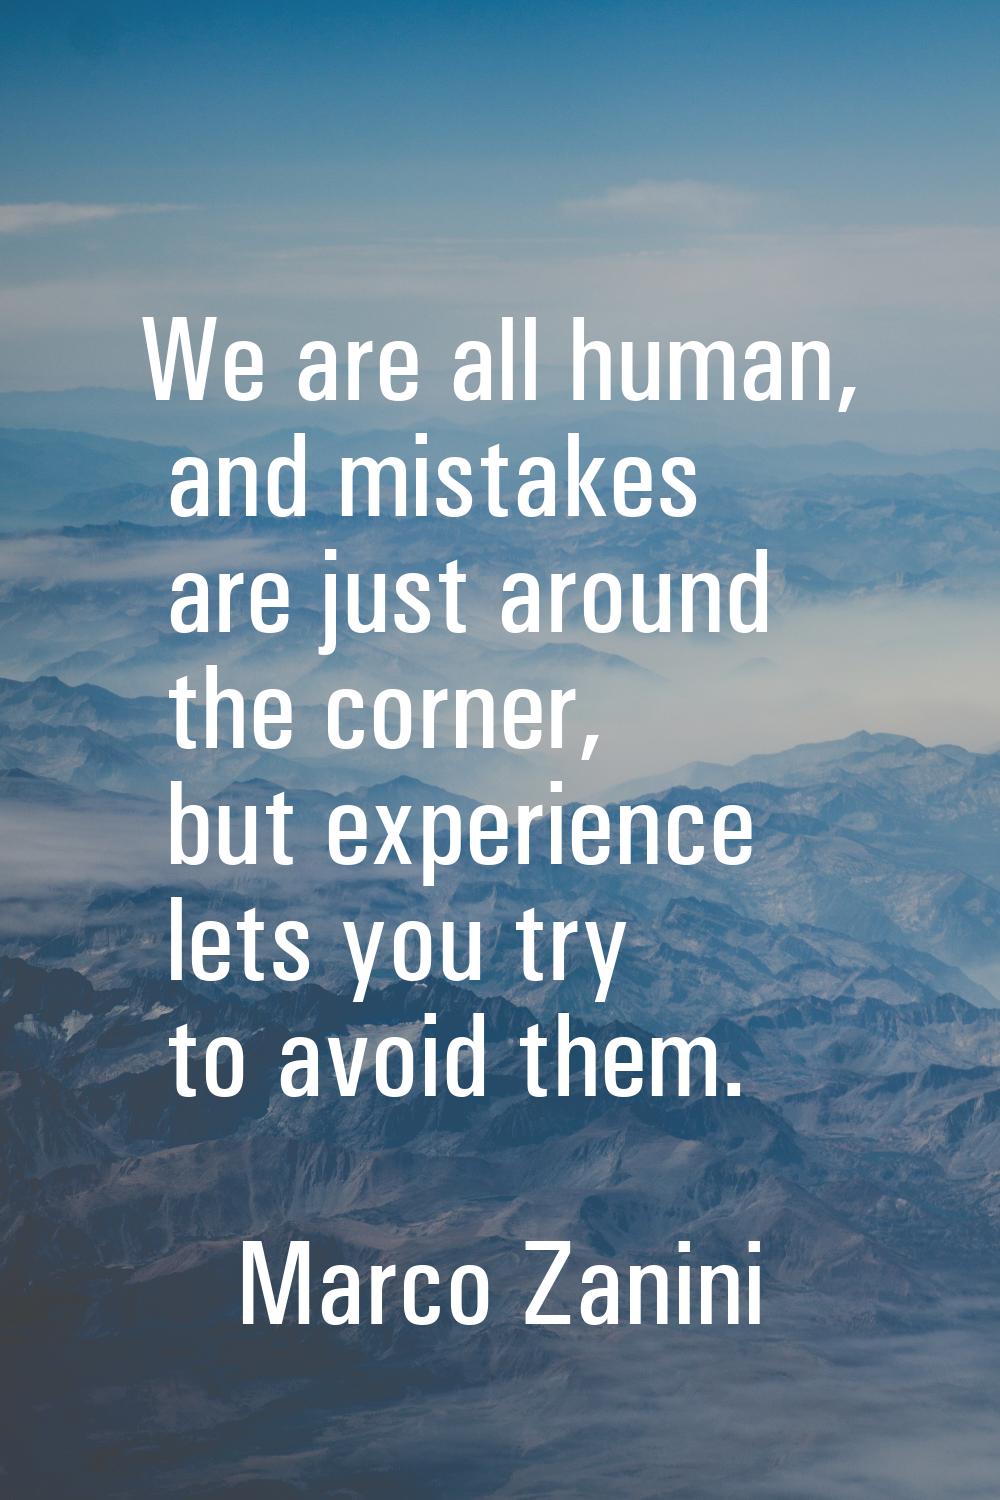 We are all human, and mistakes are just around the corner, but experience lets you try to avoid the